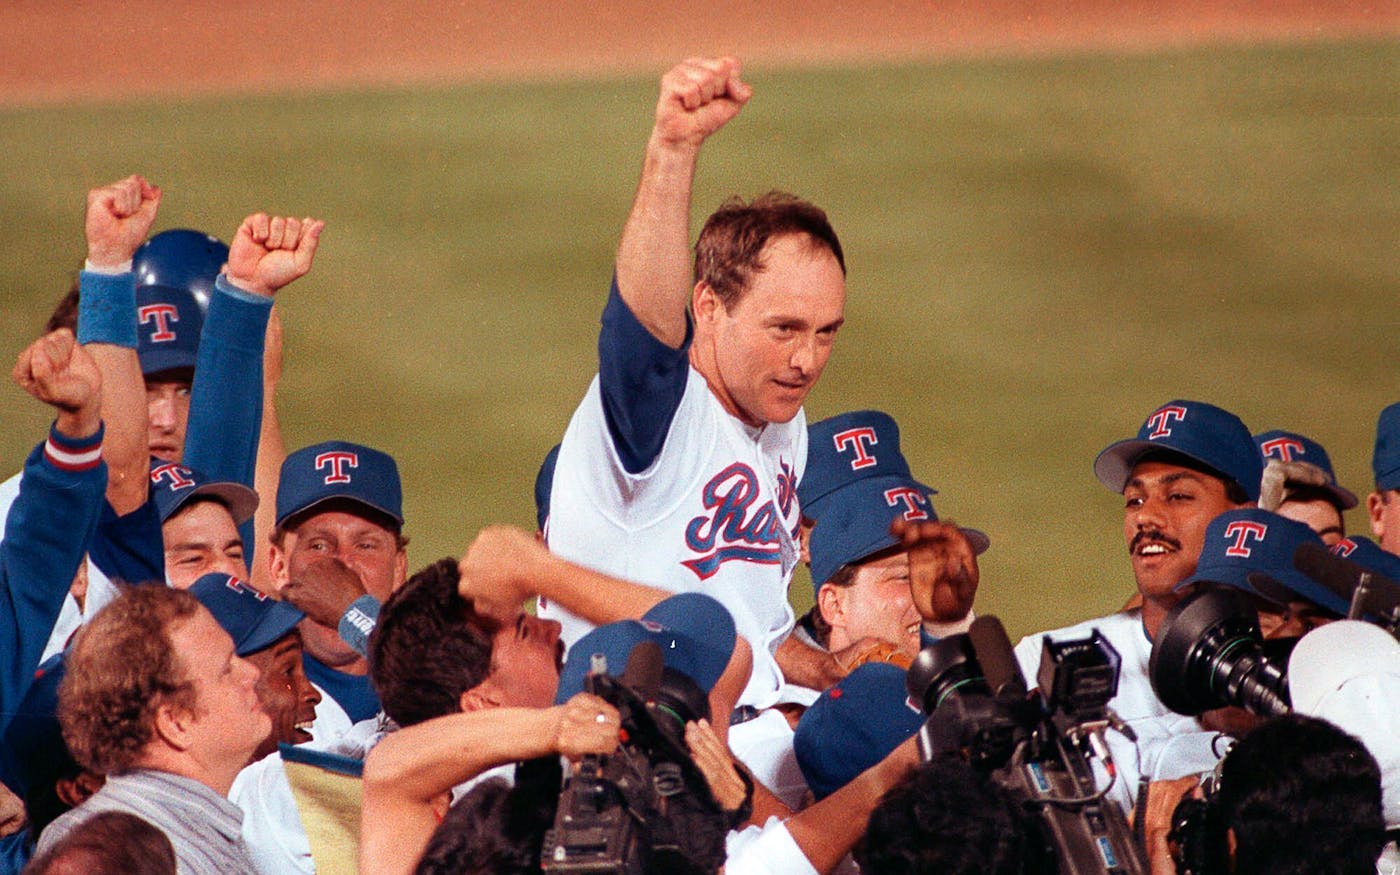 Does This Photograph Show Nolan Ryan Pitching After an On-Field